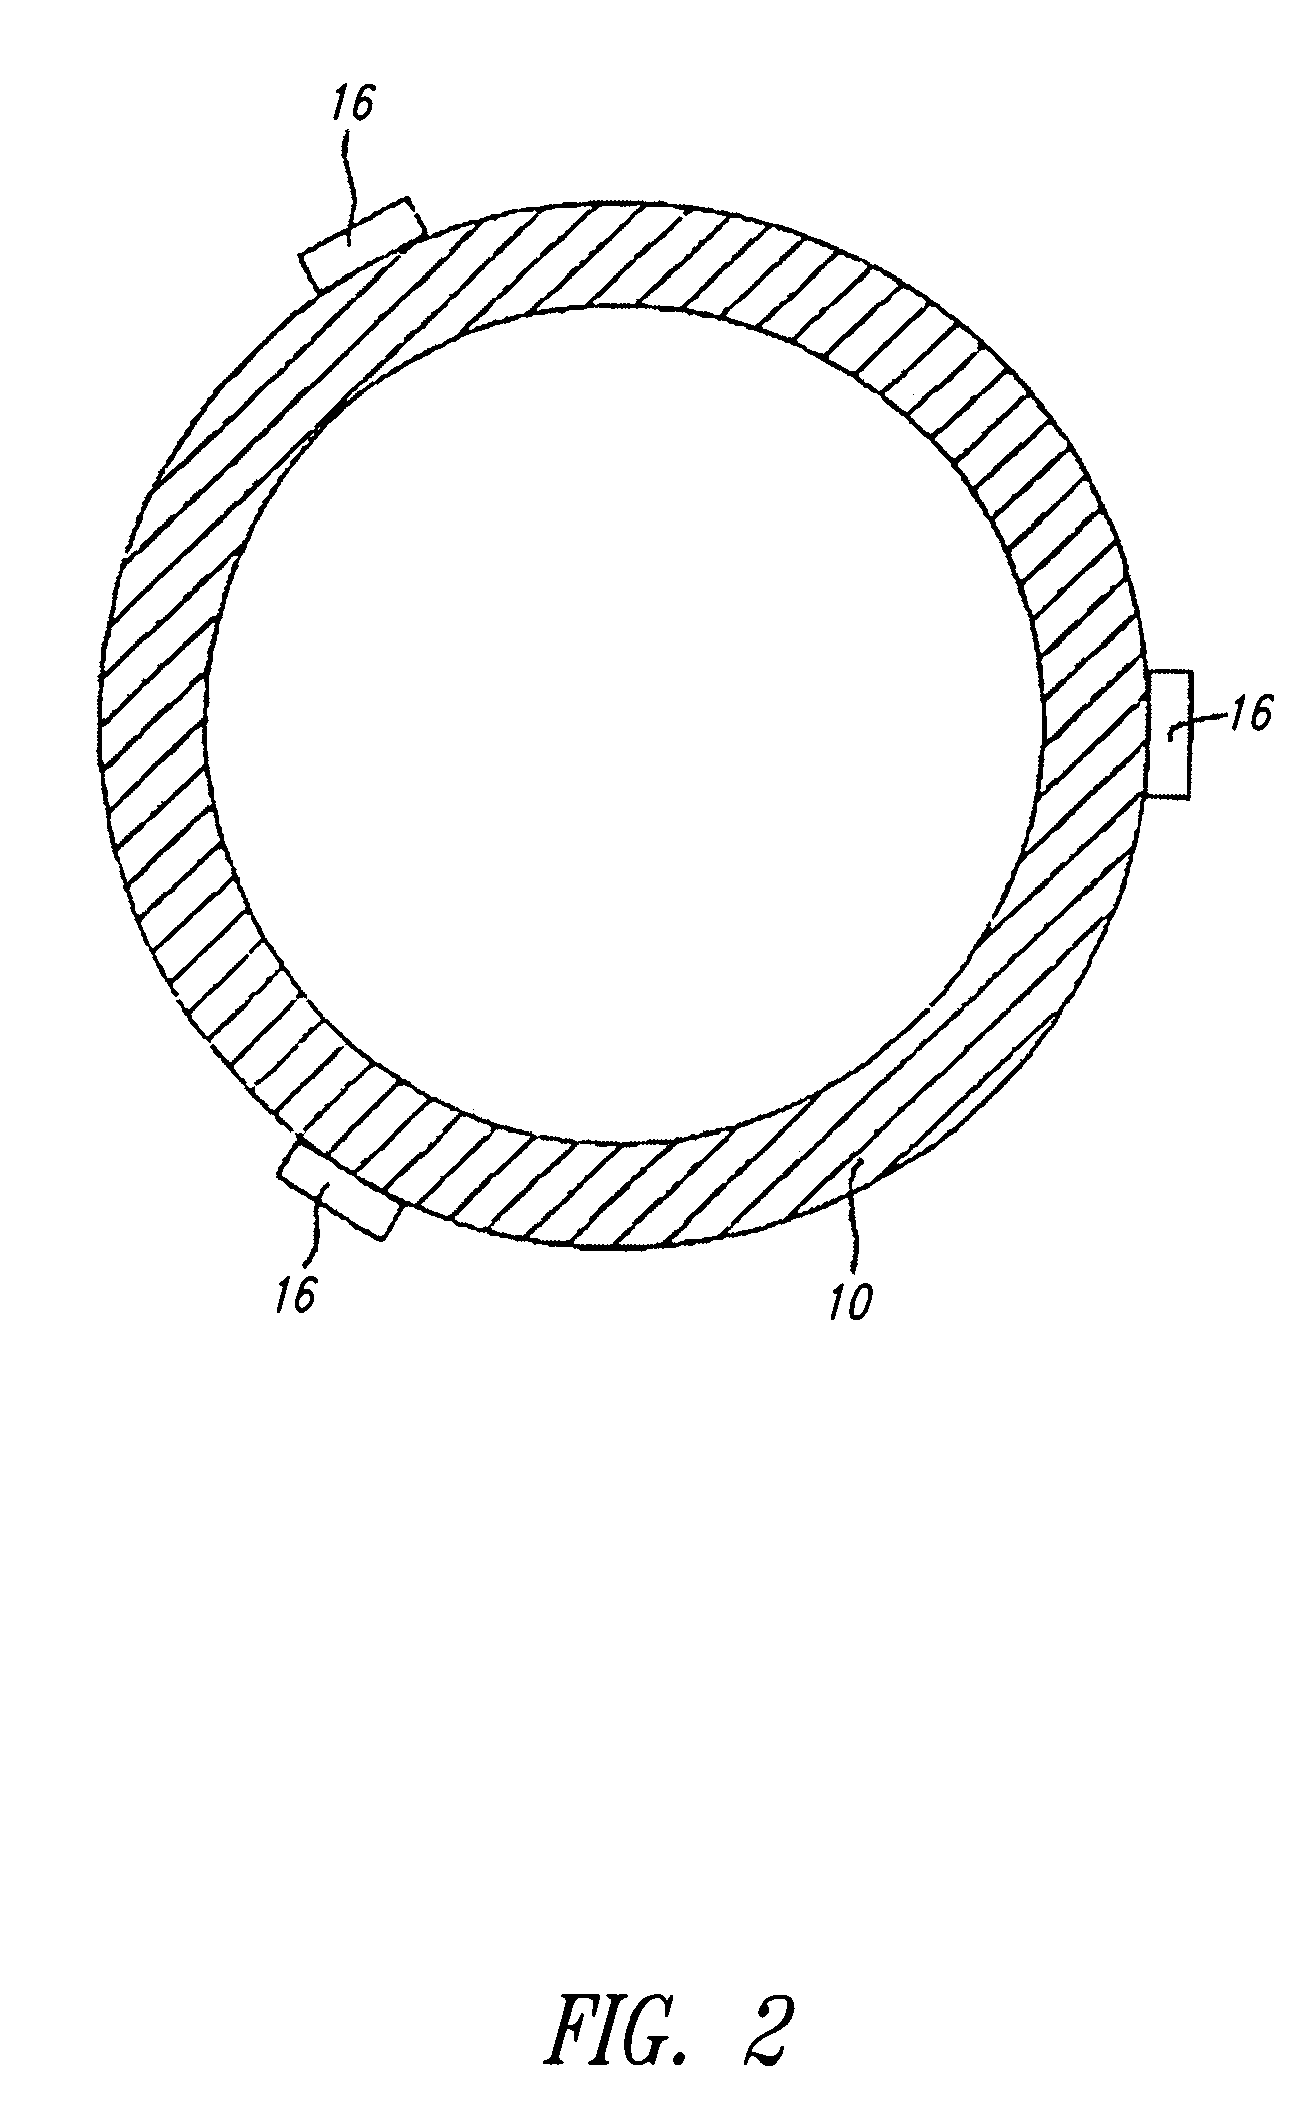 Method of operating a wind power station